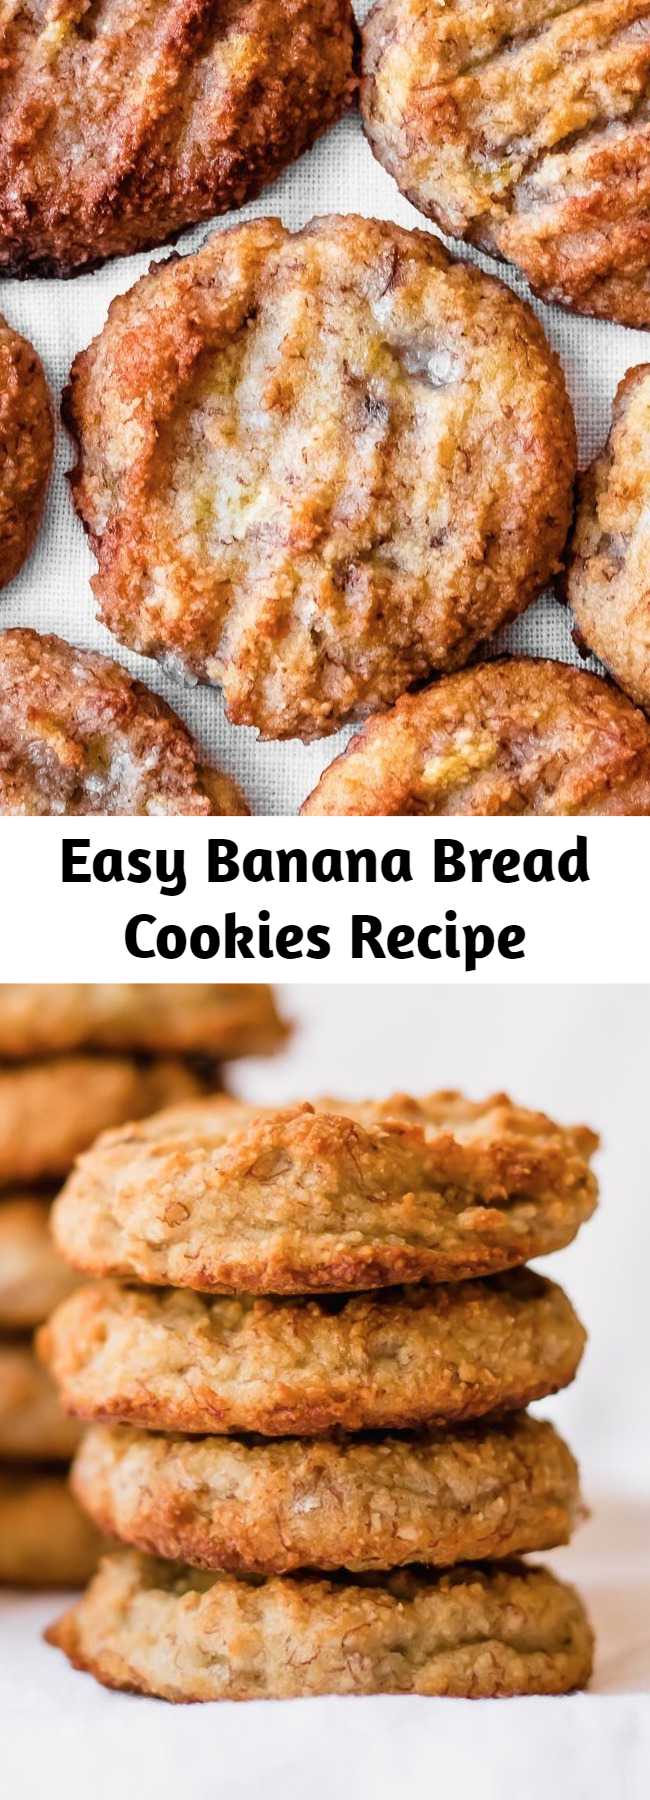 Easy Banana Bread Cookies Recipe - Banana bread cookies are a delicious and healthy treat the whole family will enjoy. These banana bread cookies are gluten free, vegan, paleo, and full of banana flavor - with just a hint of cinnamon. You'll love this EASY banana bread cookie recipe! It's naturally sweetened, moist, and healthy. Don't forget to pin this to your paleo banana recipes board! #glutenfree #bananas #paleo #vegan #healthy #healthytreats #cookies #bananacookies #bananabread #dairyfree